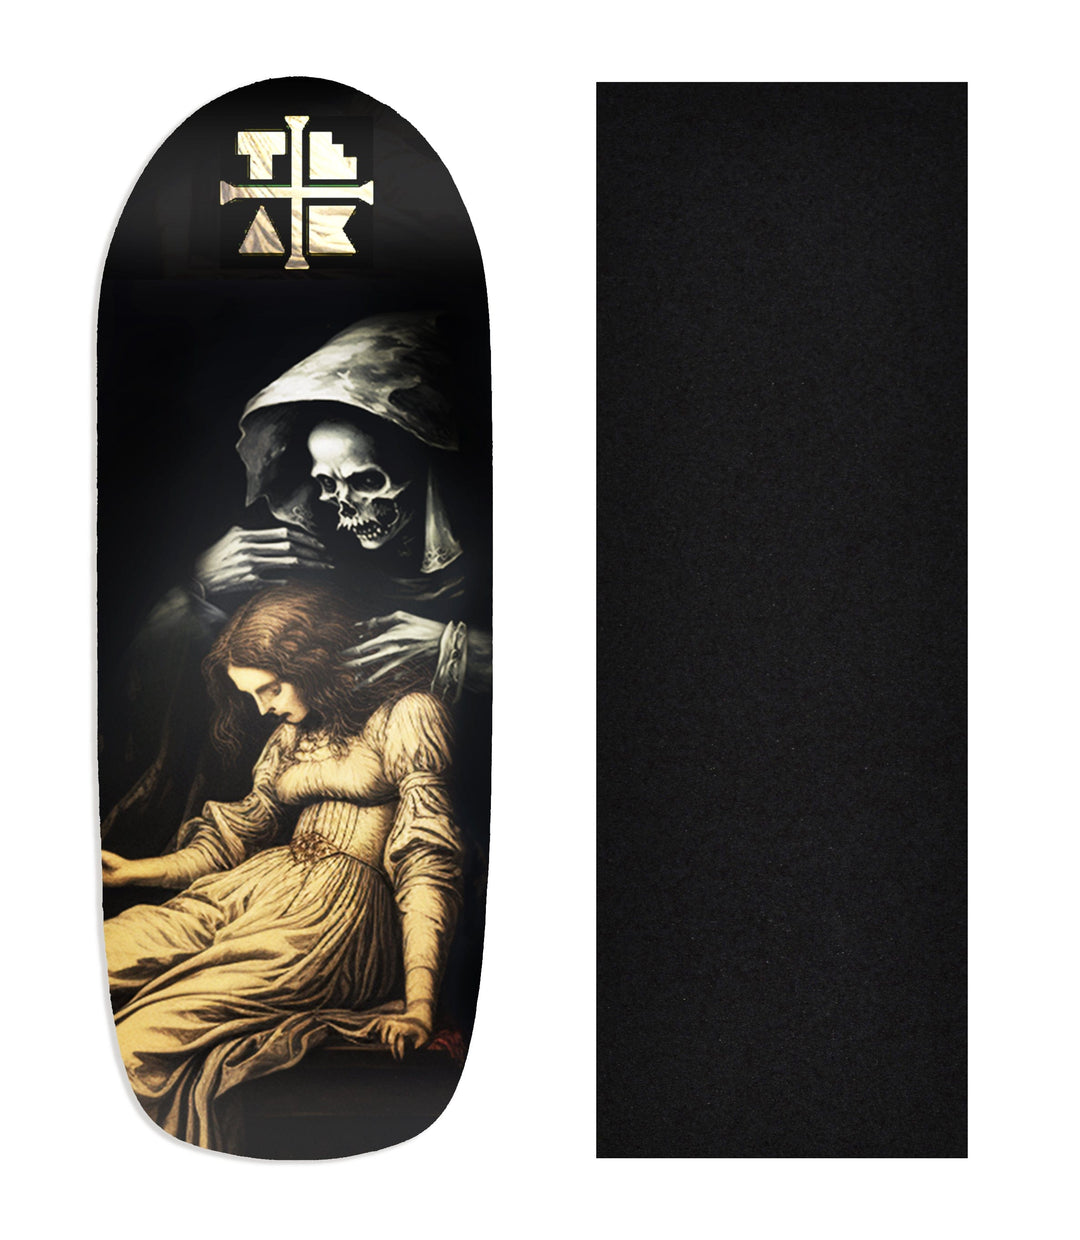 Teak Tuning Heat Transfer Graphic Wooden Fingerboard Deck, "The Visit" Poolparty Deck